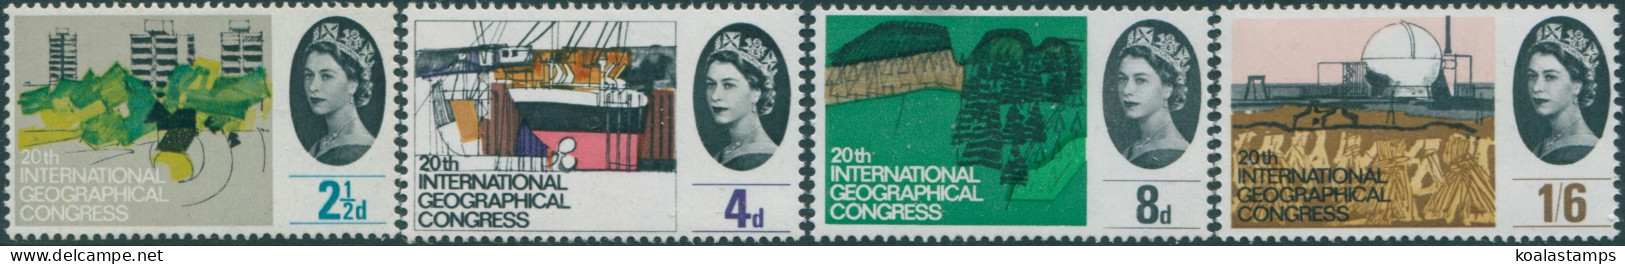 Great Britain 1964 SG651-654 QEII Geographical Congress Set MNH - Unclassified